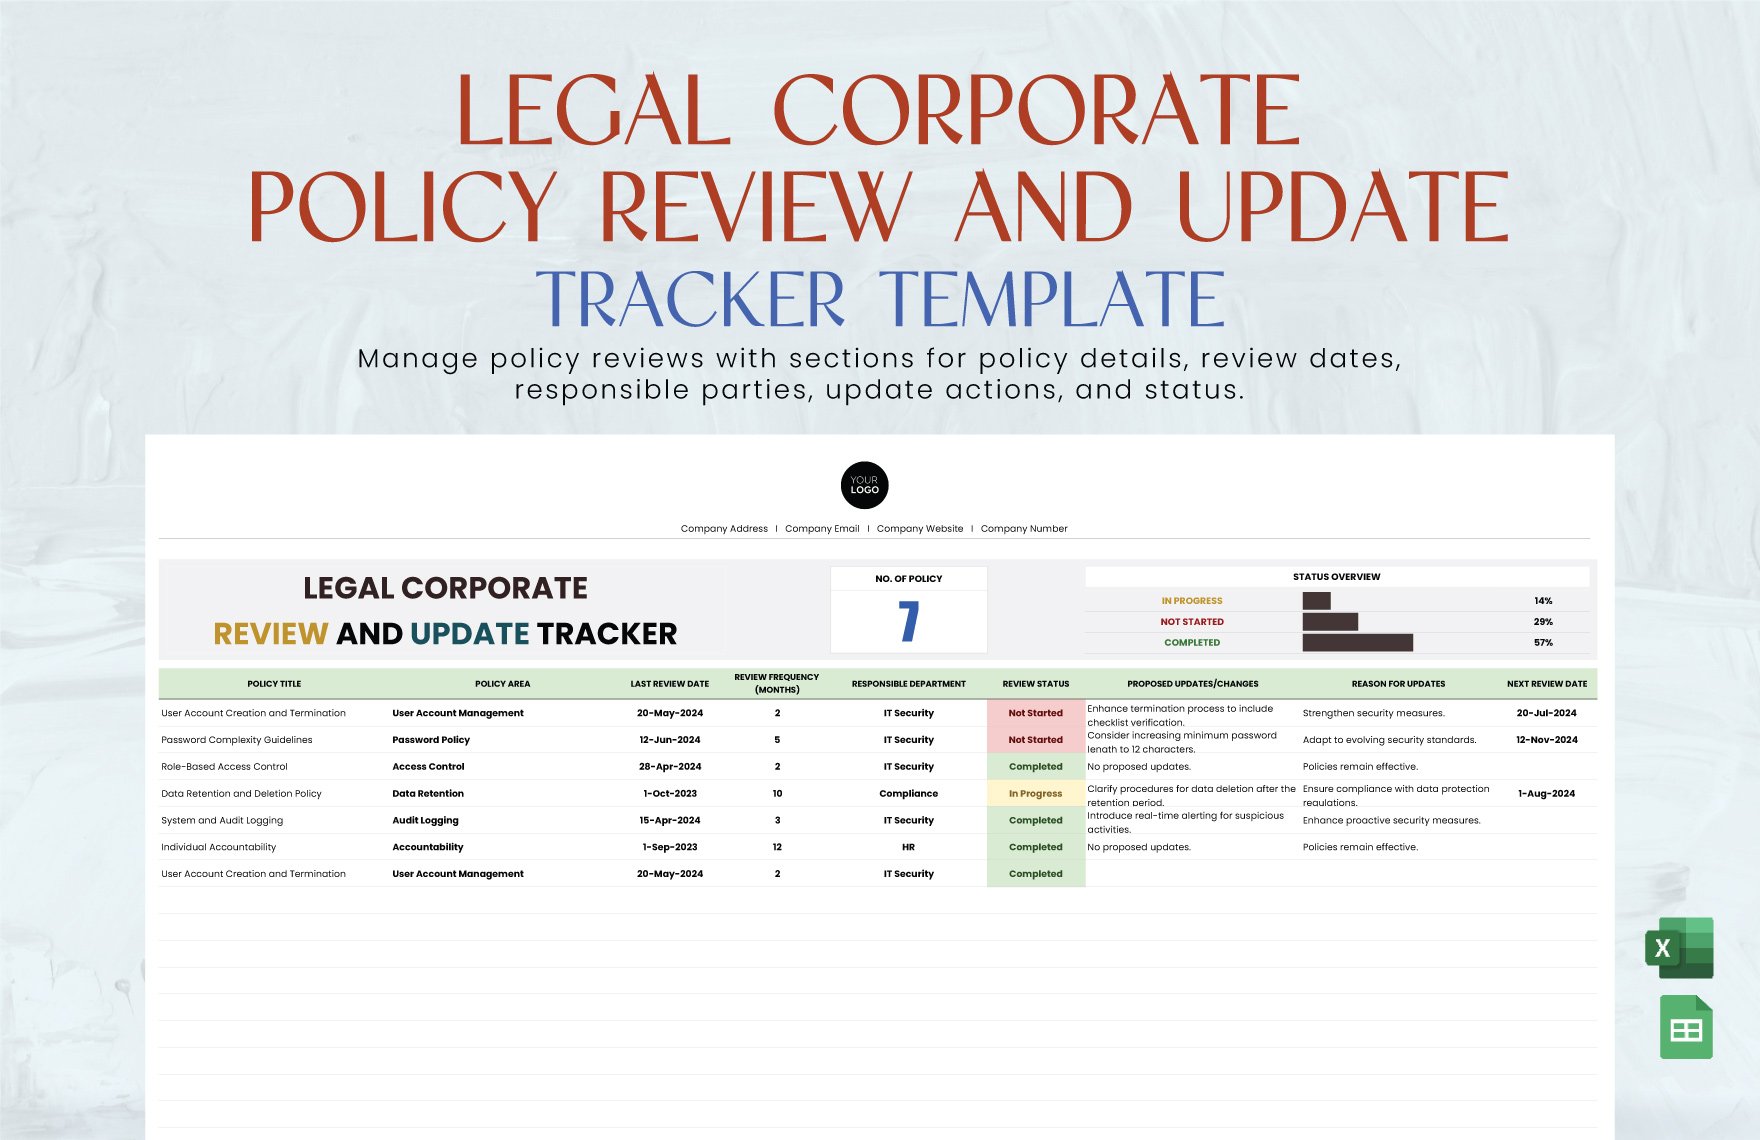 Legal Corporate Policy Review and Update Tracker Template in Excel, Google Sheets